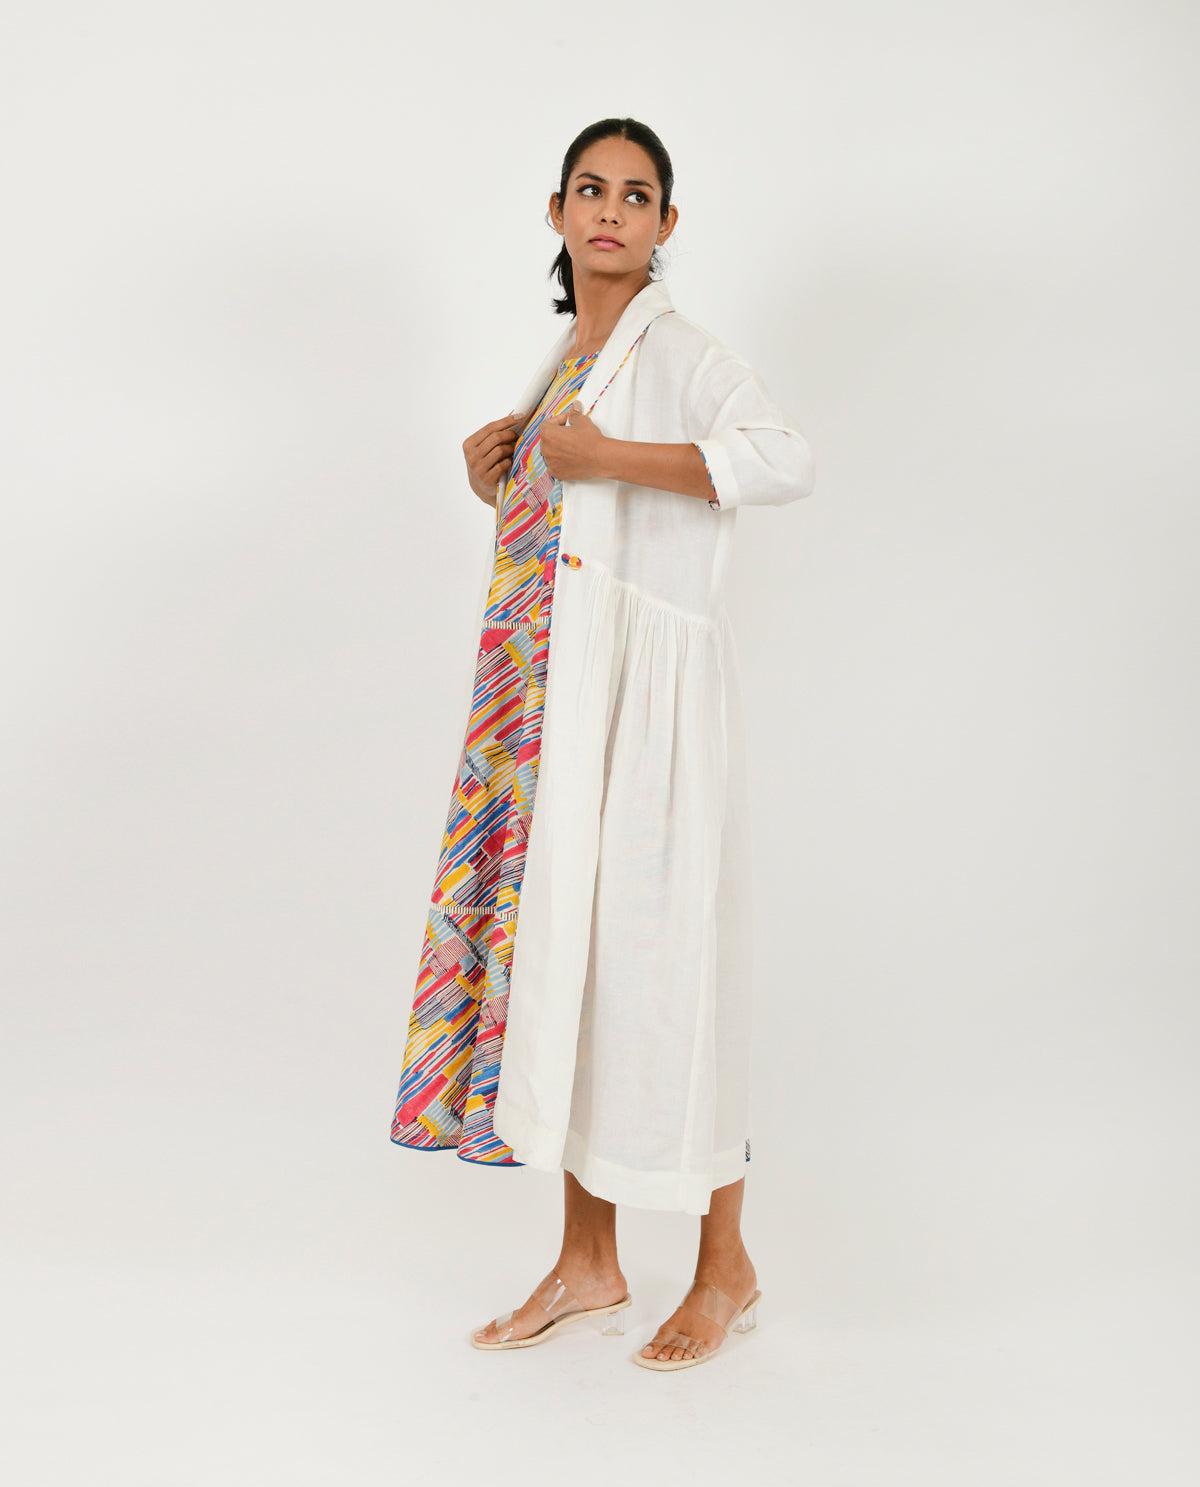 Off-White Linen Jacket by Rias Jaipur with Casual Wear, Jackets, Linen Blend, Natural, Relaxed Fit, Solids, White, Womenswear, Yaadein, Yaadein by Rias Jaipur at Kamakhyaa for sustainable fashion